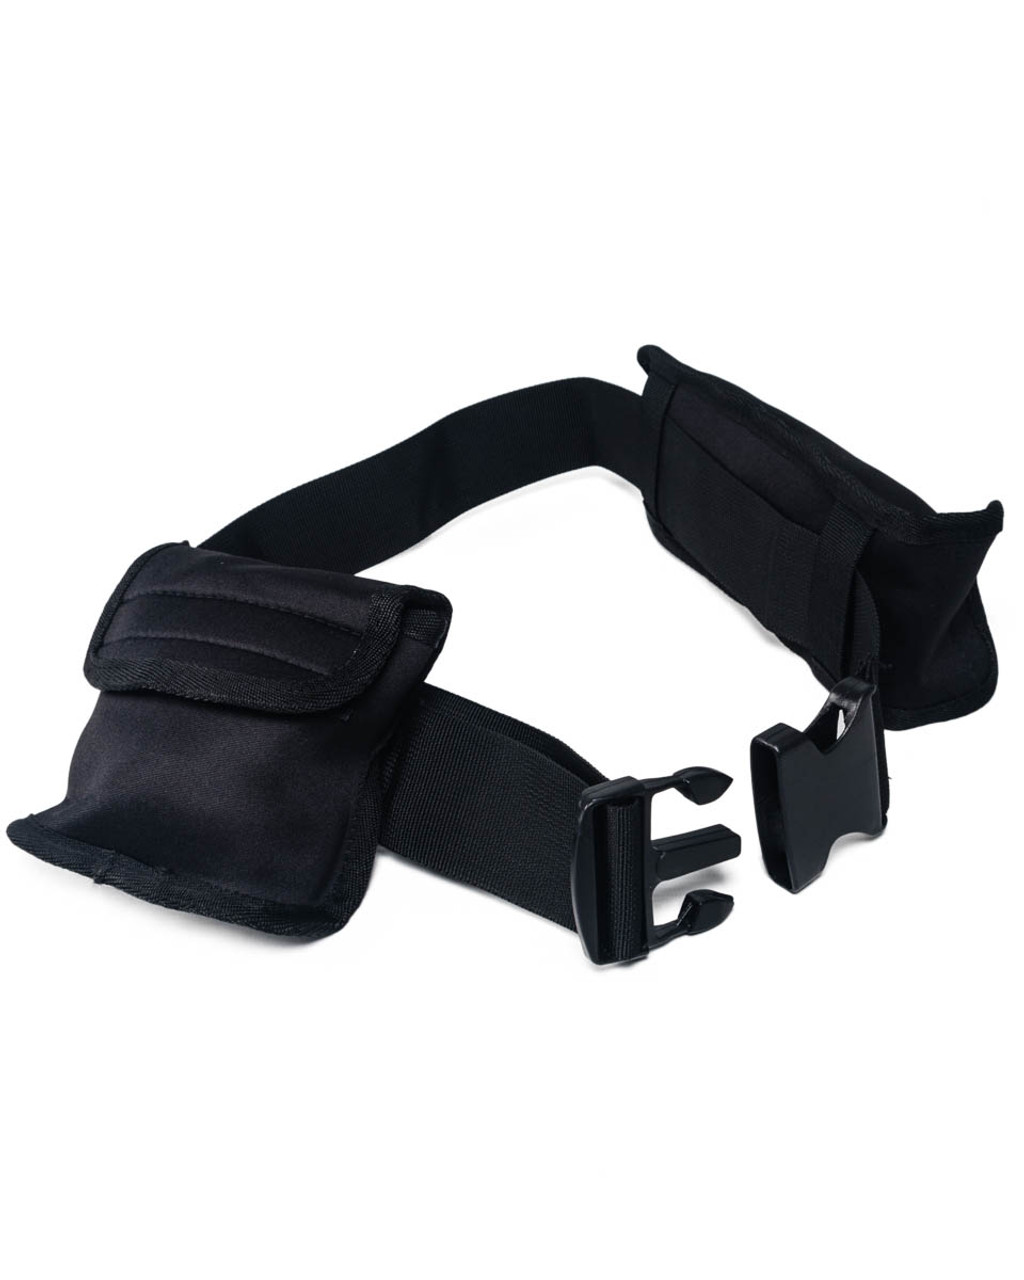 Medical Belt with Pouches | Physical Sports First Aid